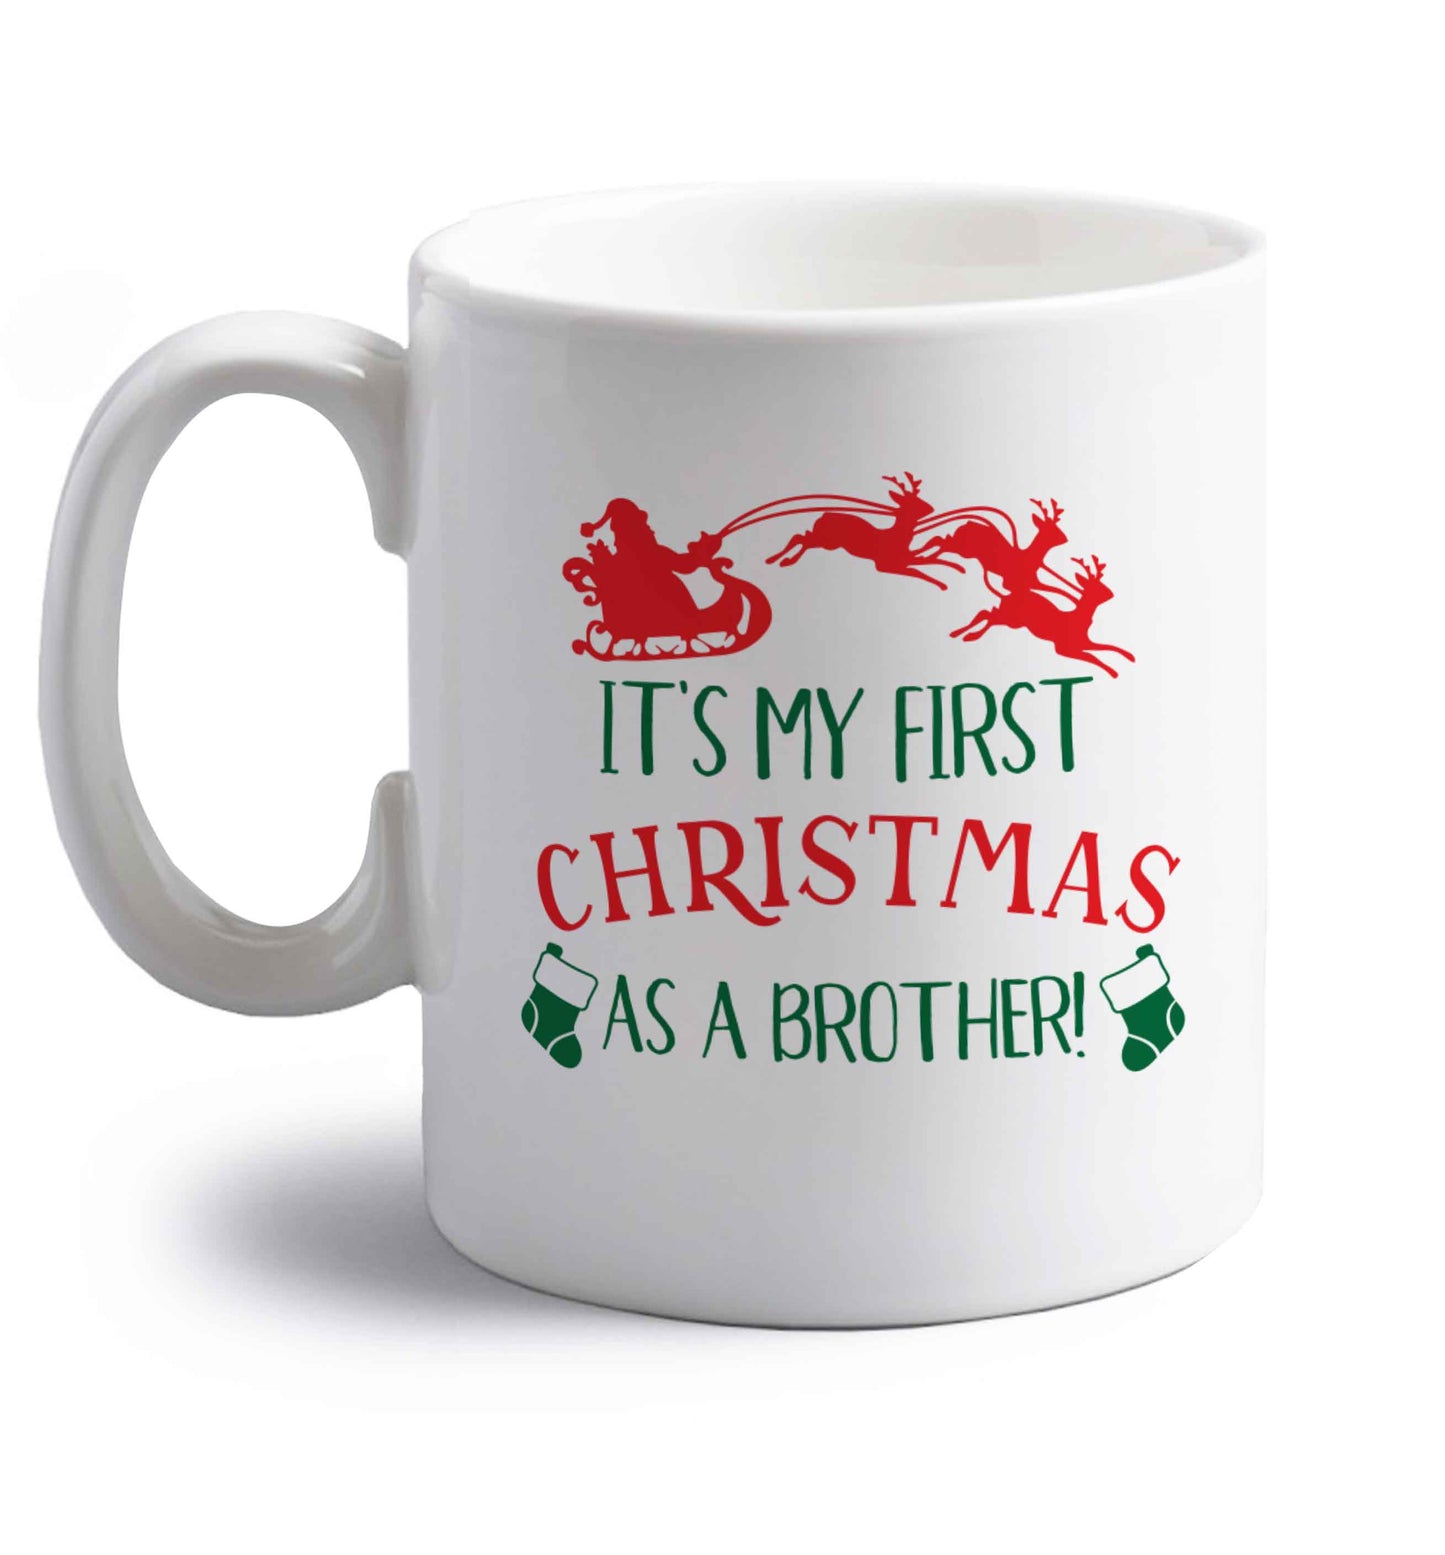 It's my first Christmas as a brother! right handed white ceramic mug 